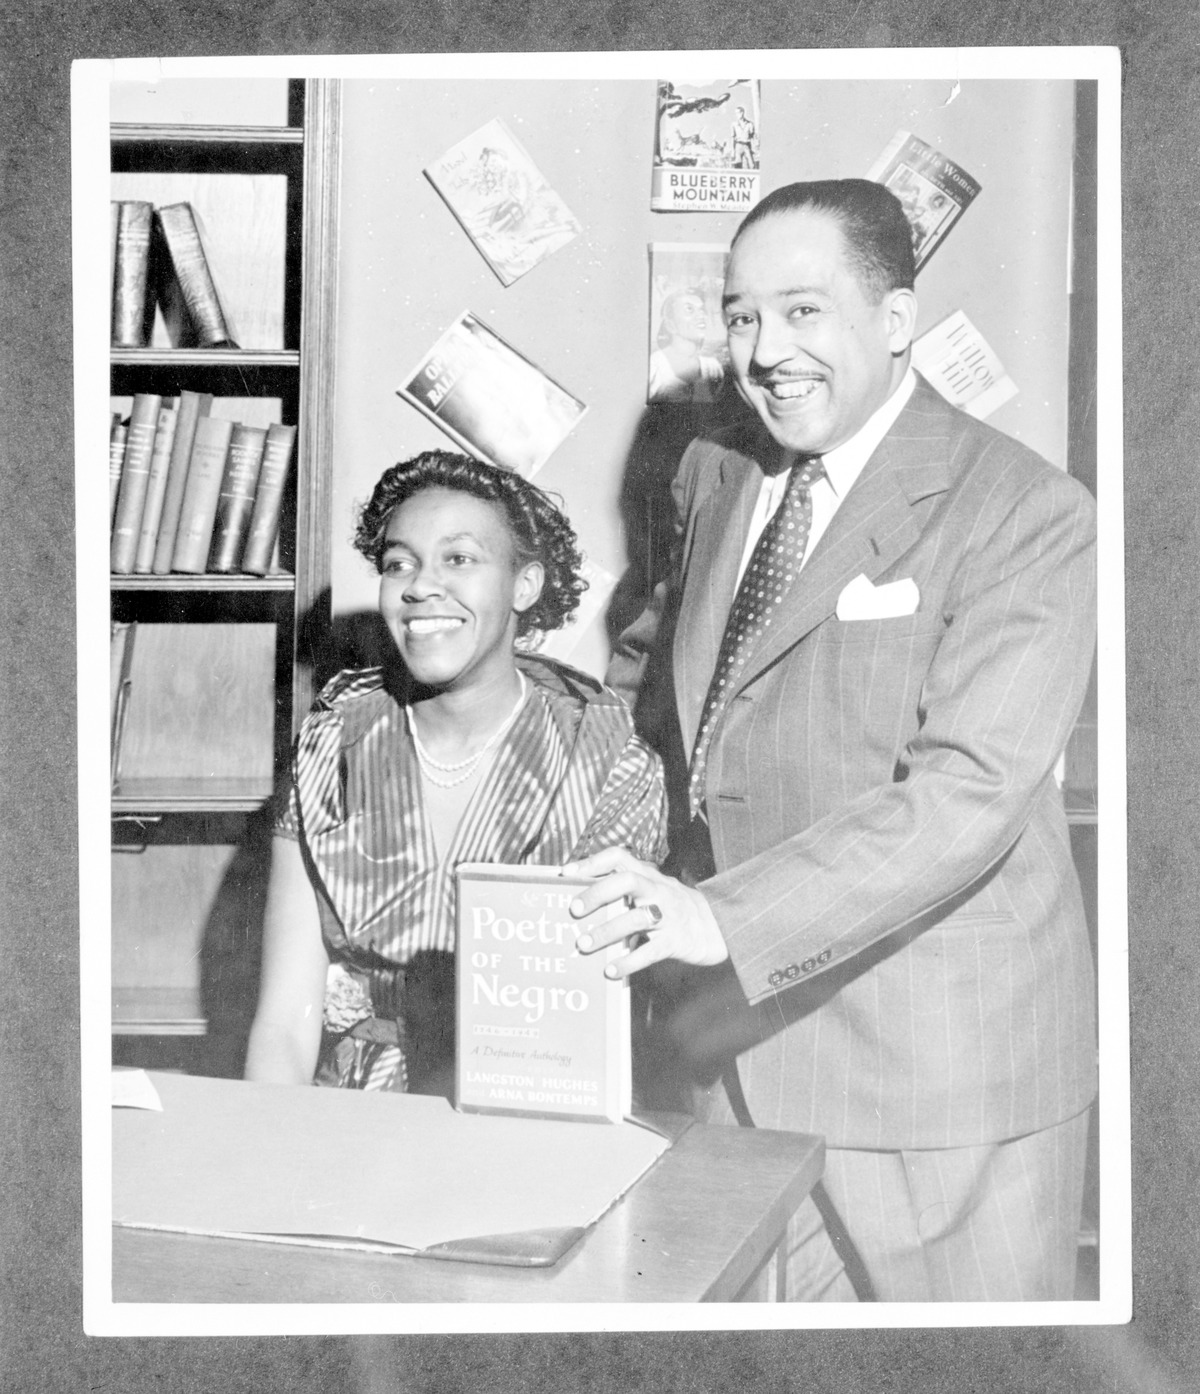 Photograph of Langston Hughes with Gwendolyn Brooks.